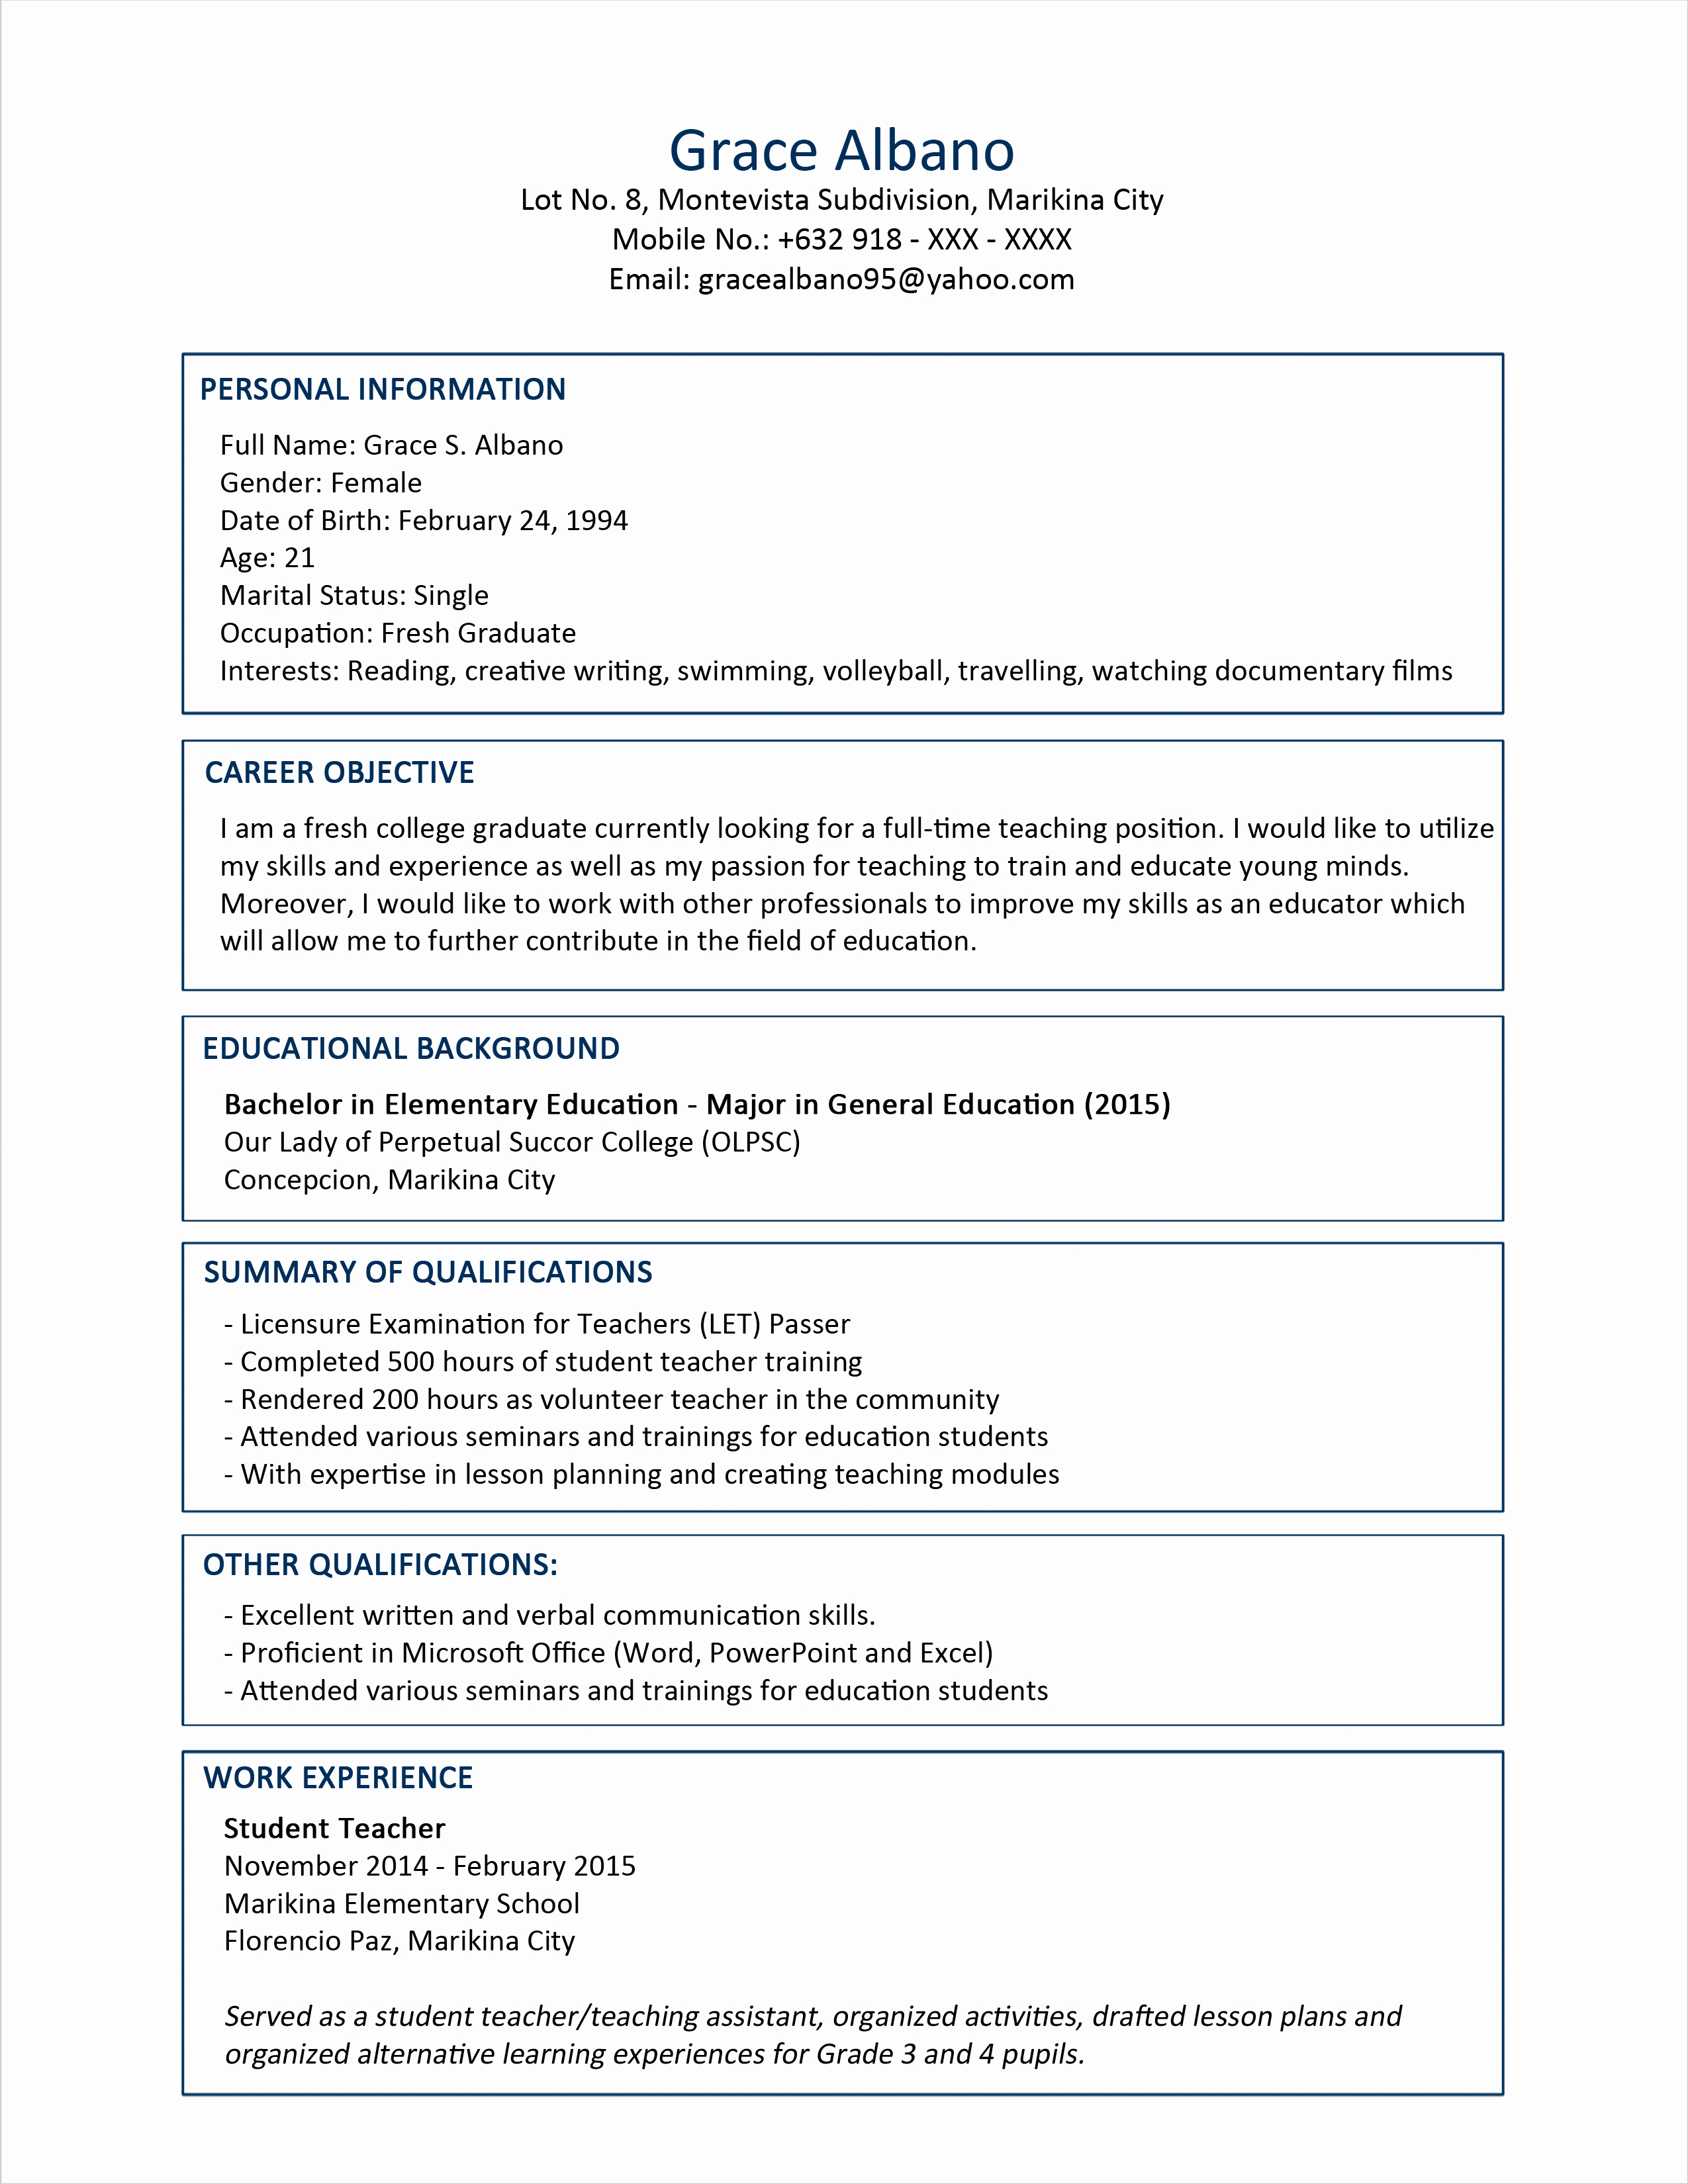 Sample Resume format for Fresh Graduates Two Page format